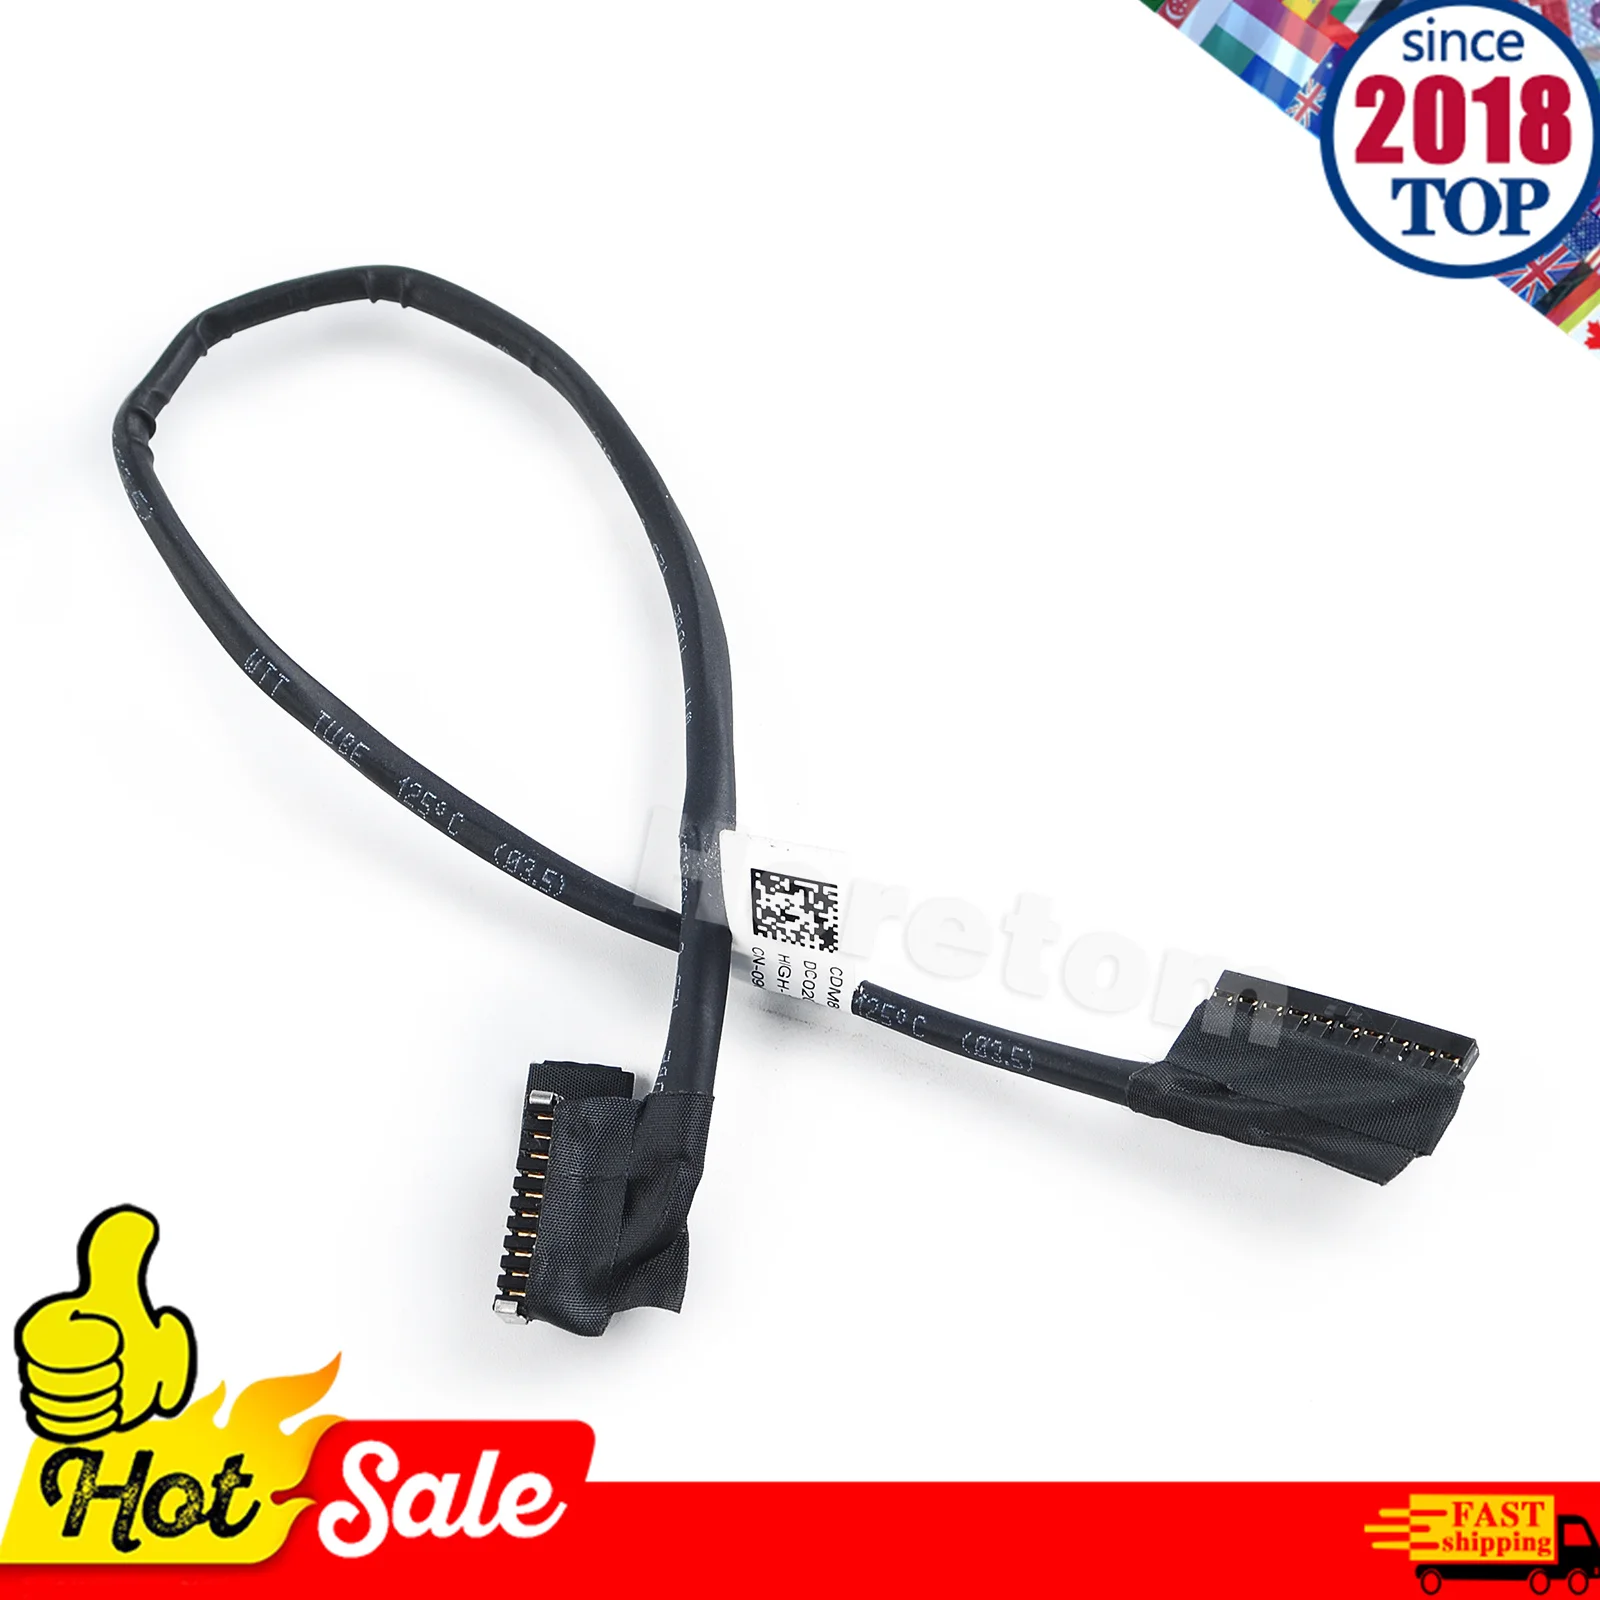 

Laptop Battery Cable Connector 968CF For Dell Latitude 5580 5590 5591 Precision 3520 3530 DC02002NW00 Replacement 0968CF